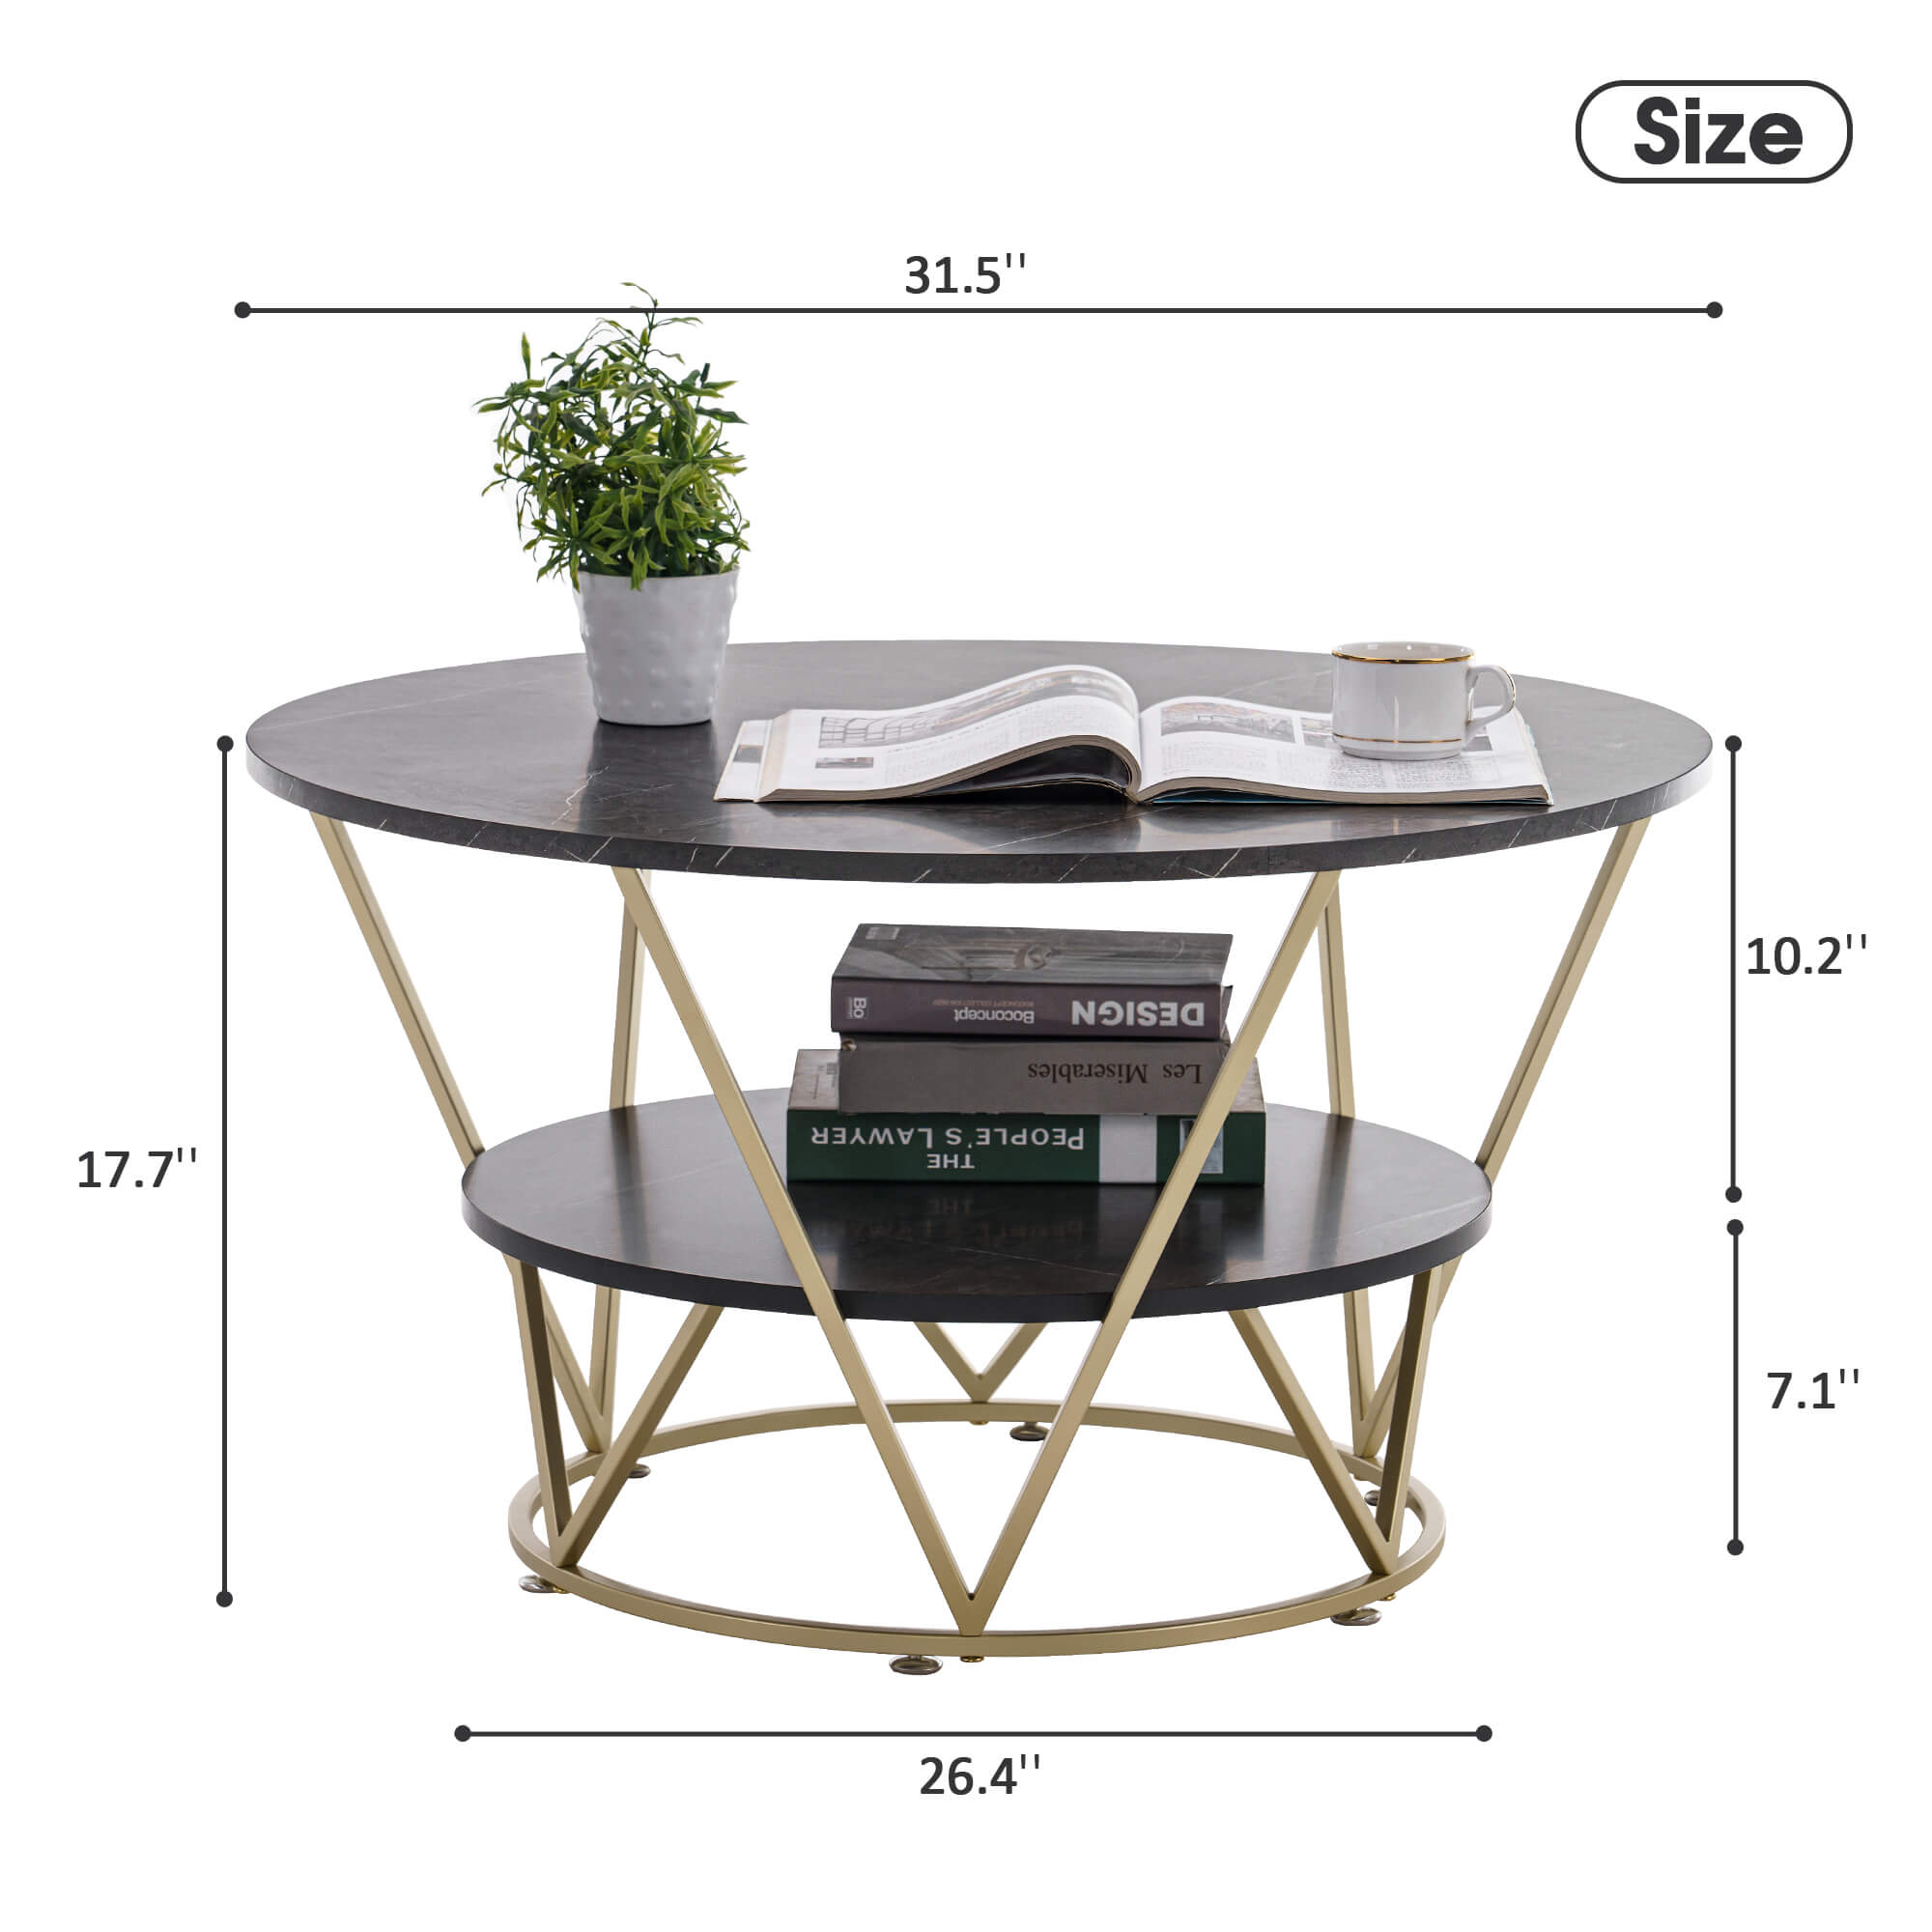 Ivinta 2-Tier Round Coffee Table, 31.5 Inch Modern Coffee Table for Living Room